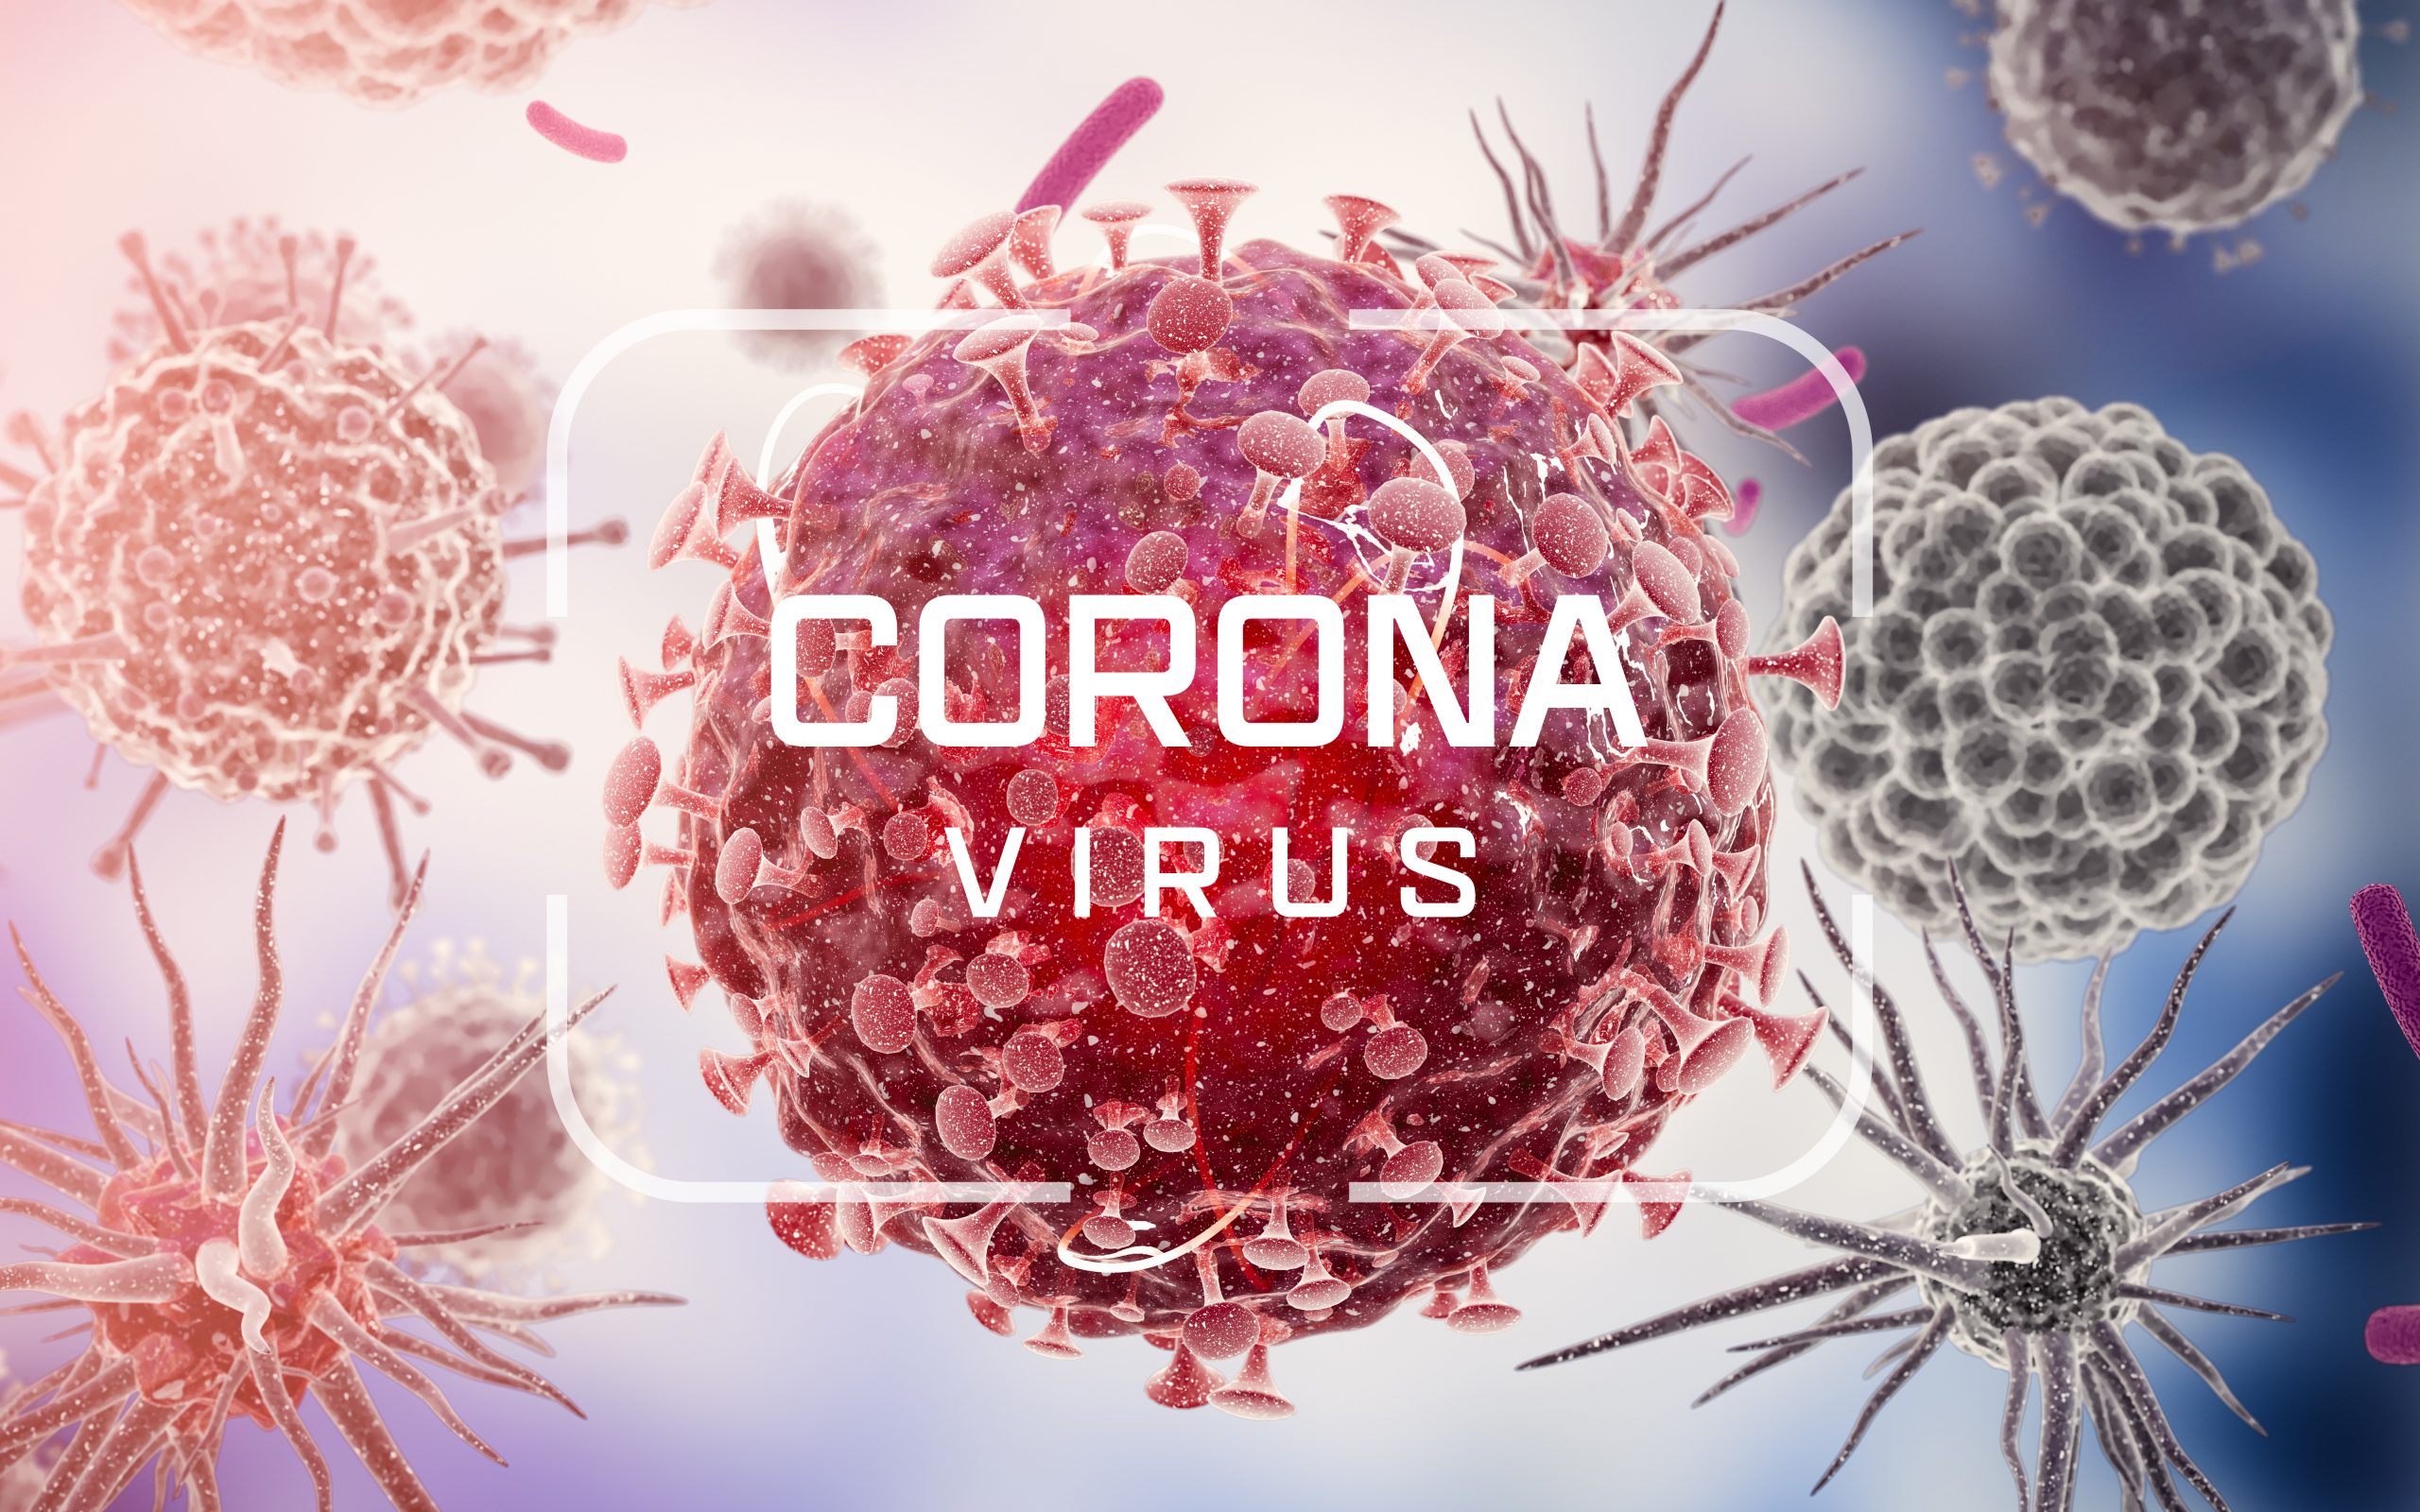 What You Need to Know About the Coronavirus and Workers’ Compensation